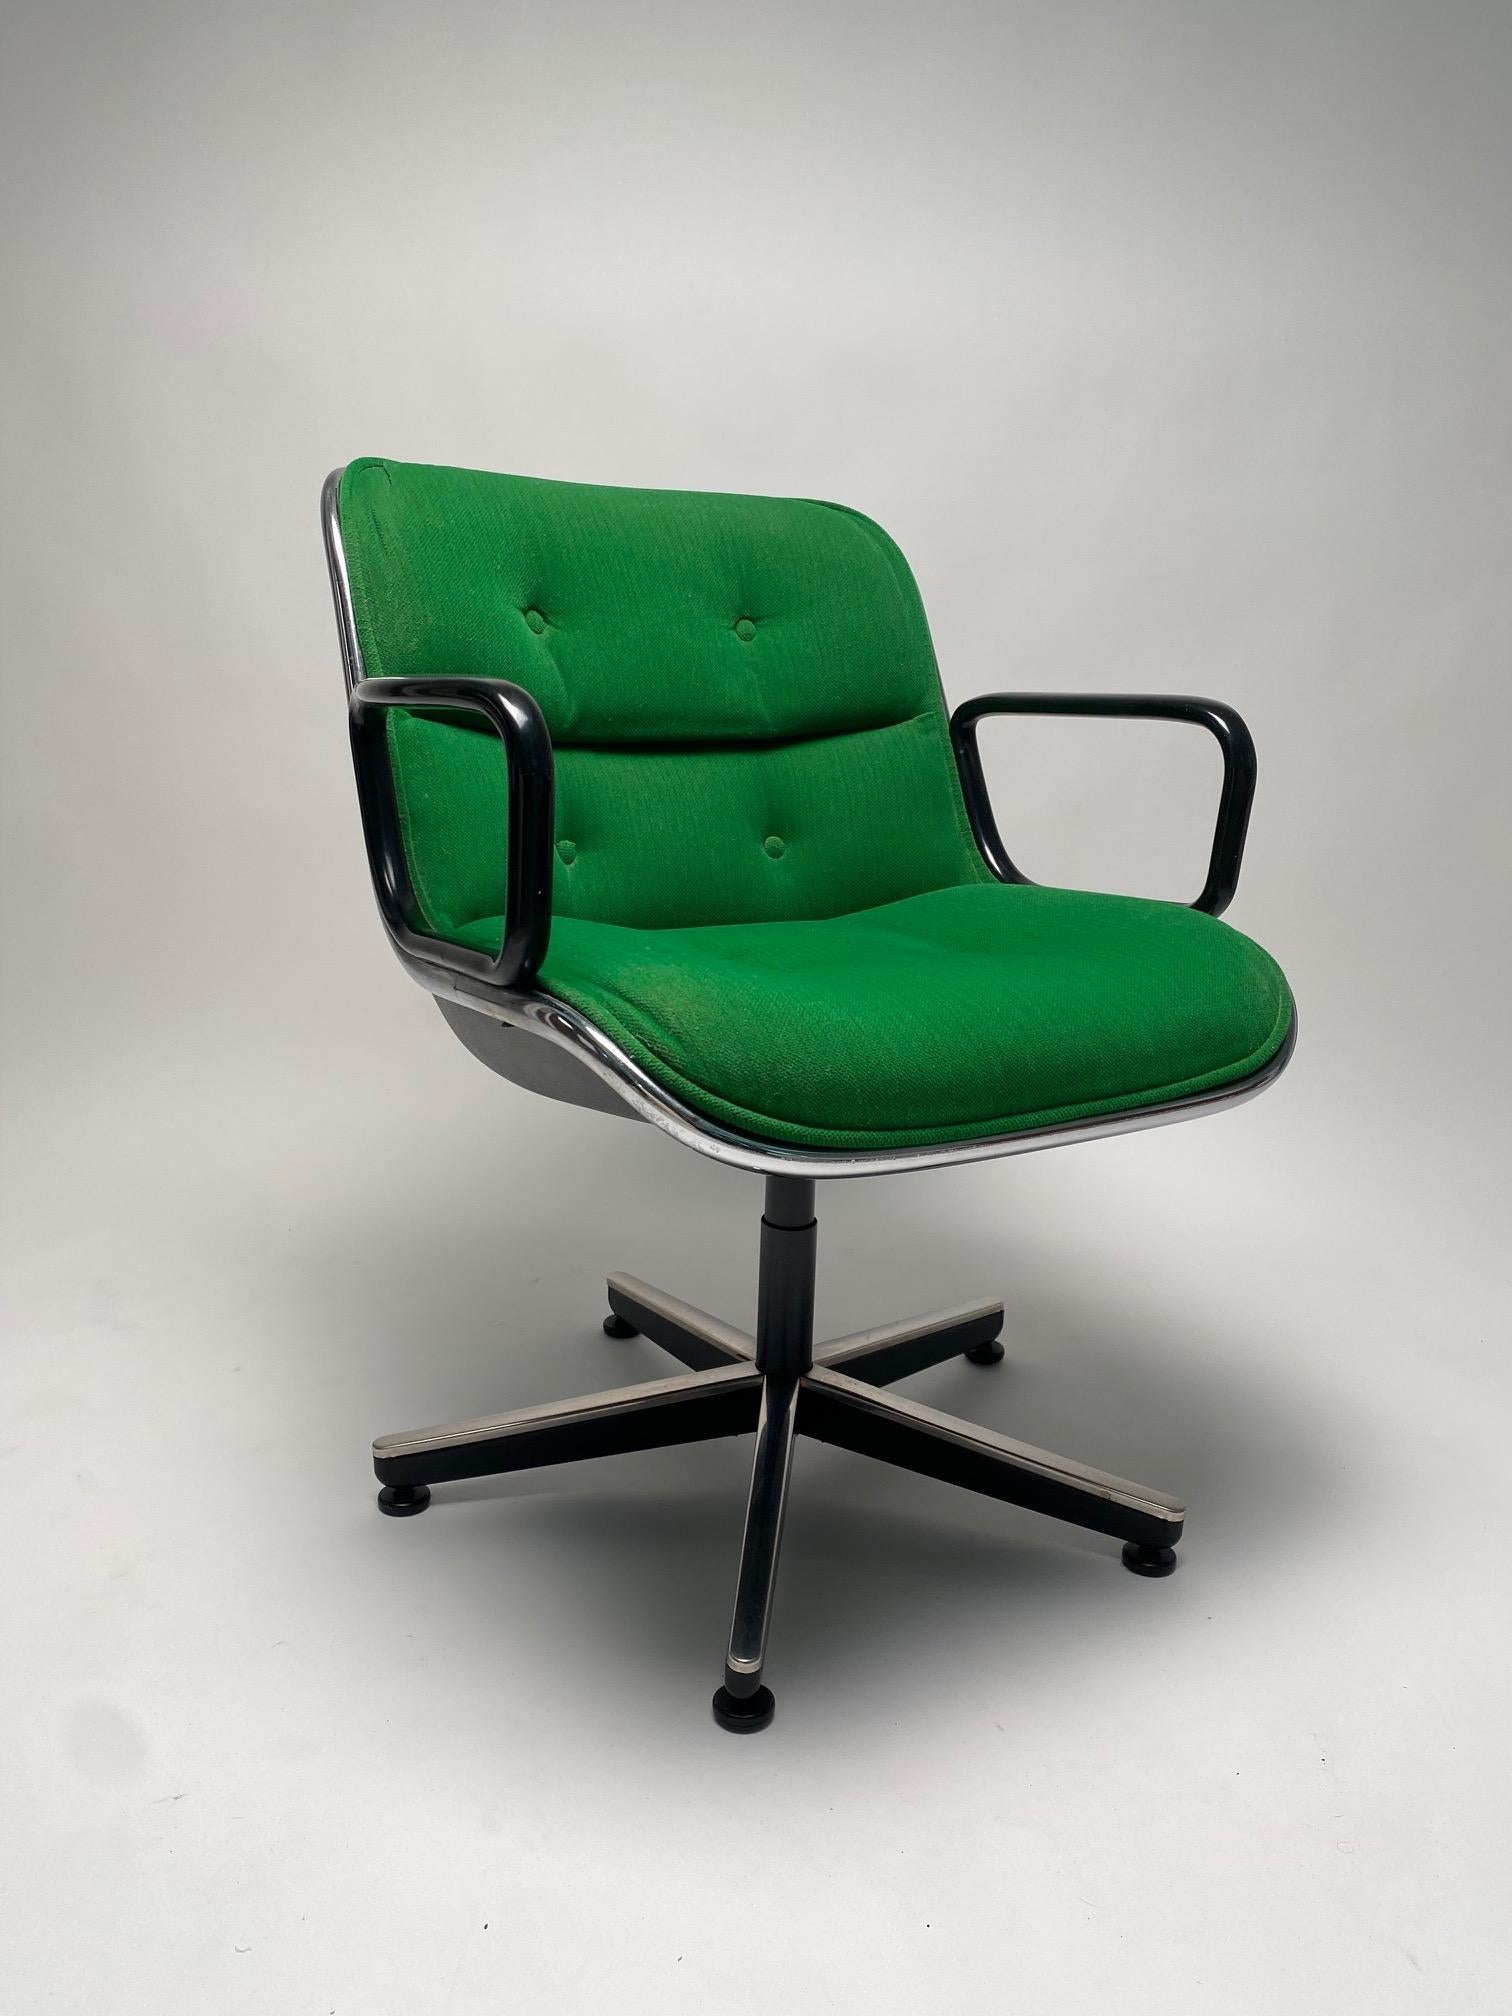 Charles Pollock, executive chairs for Knoll, 1963

It is one of the most iconic and representative office armchairs, created by the American artist and designer Charles Pollock. Here we offer a pair of these swivel chairs in a vibrant bright green